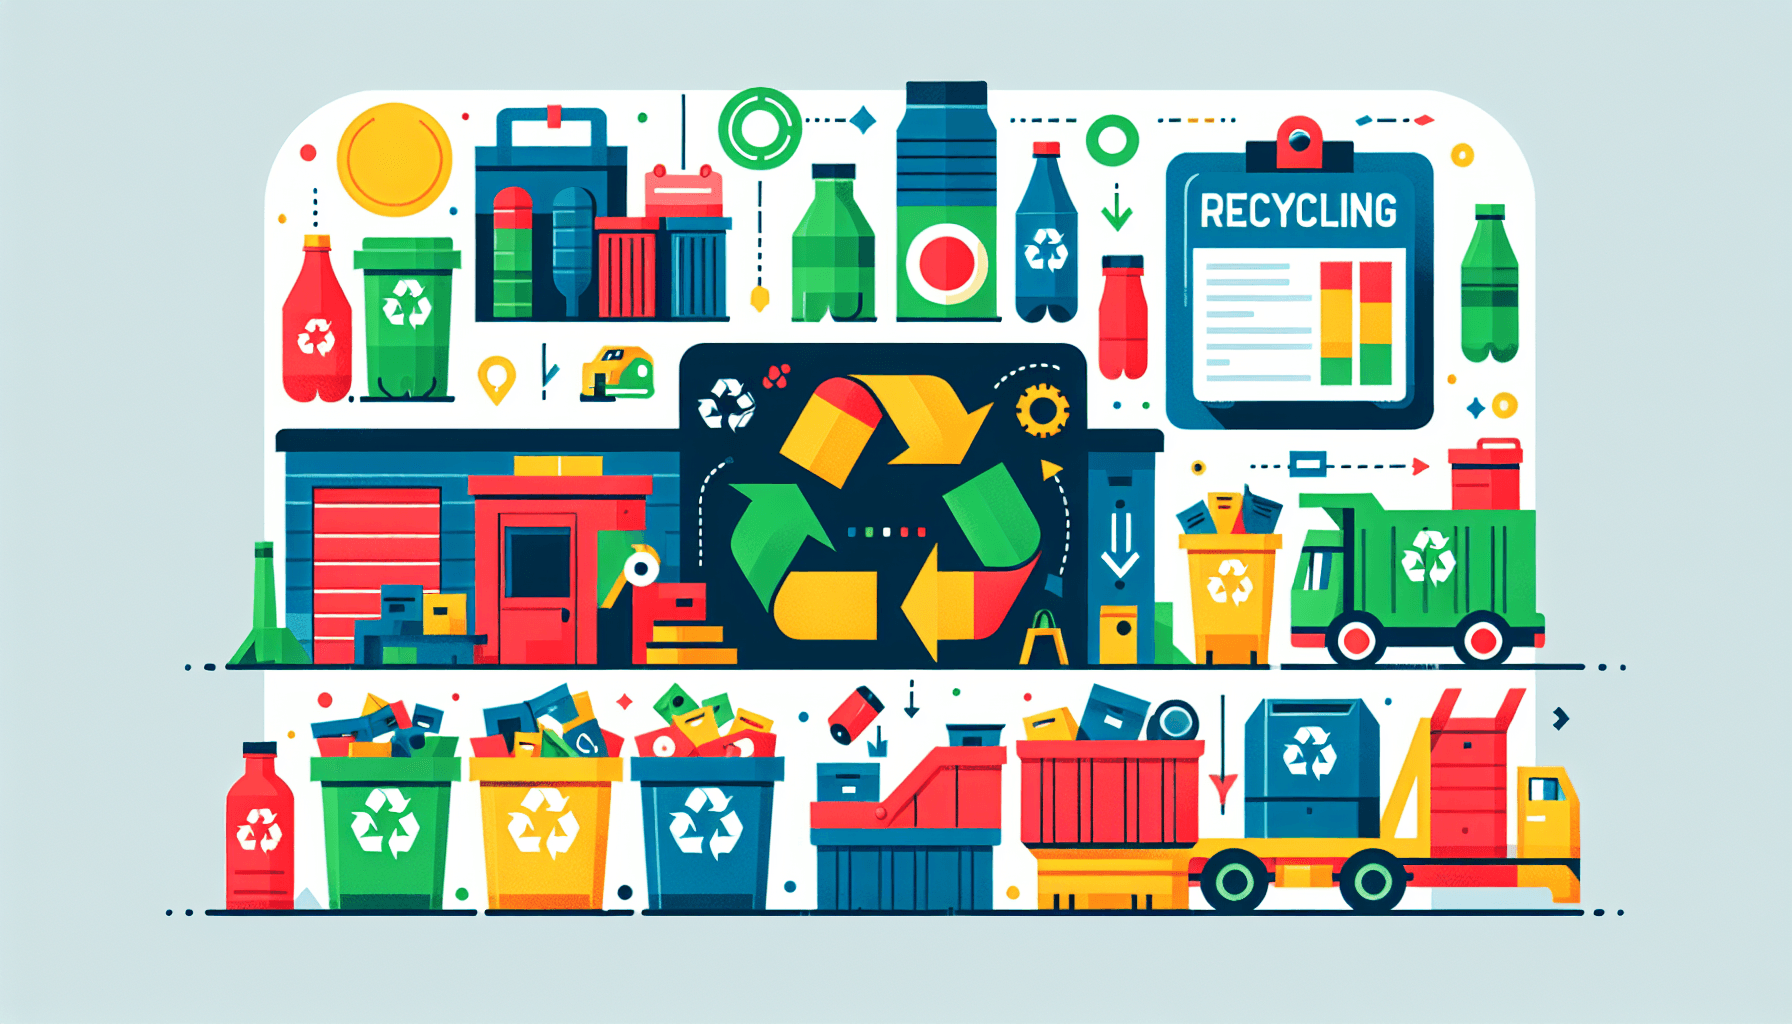 Recycling in flat illustration style and white background, red #f47574, green #88c7a8, yellow #fcc44b, and blue #645bc8 colors.